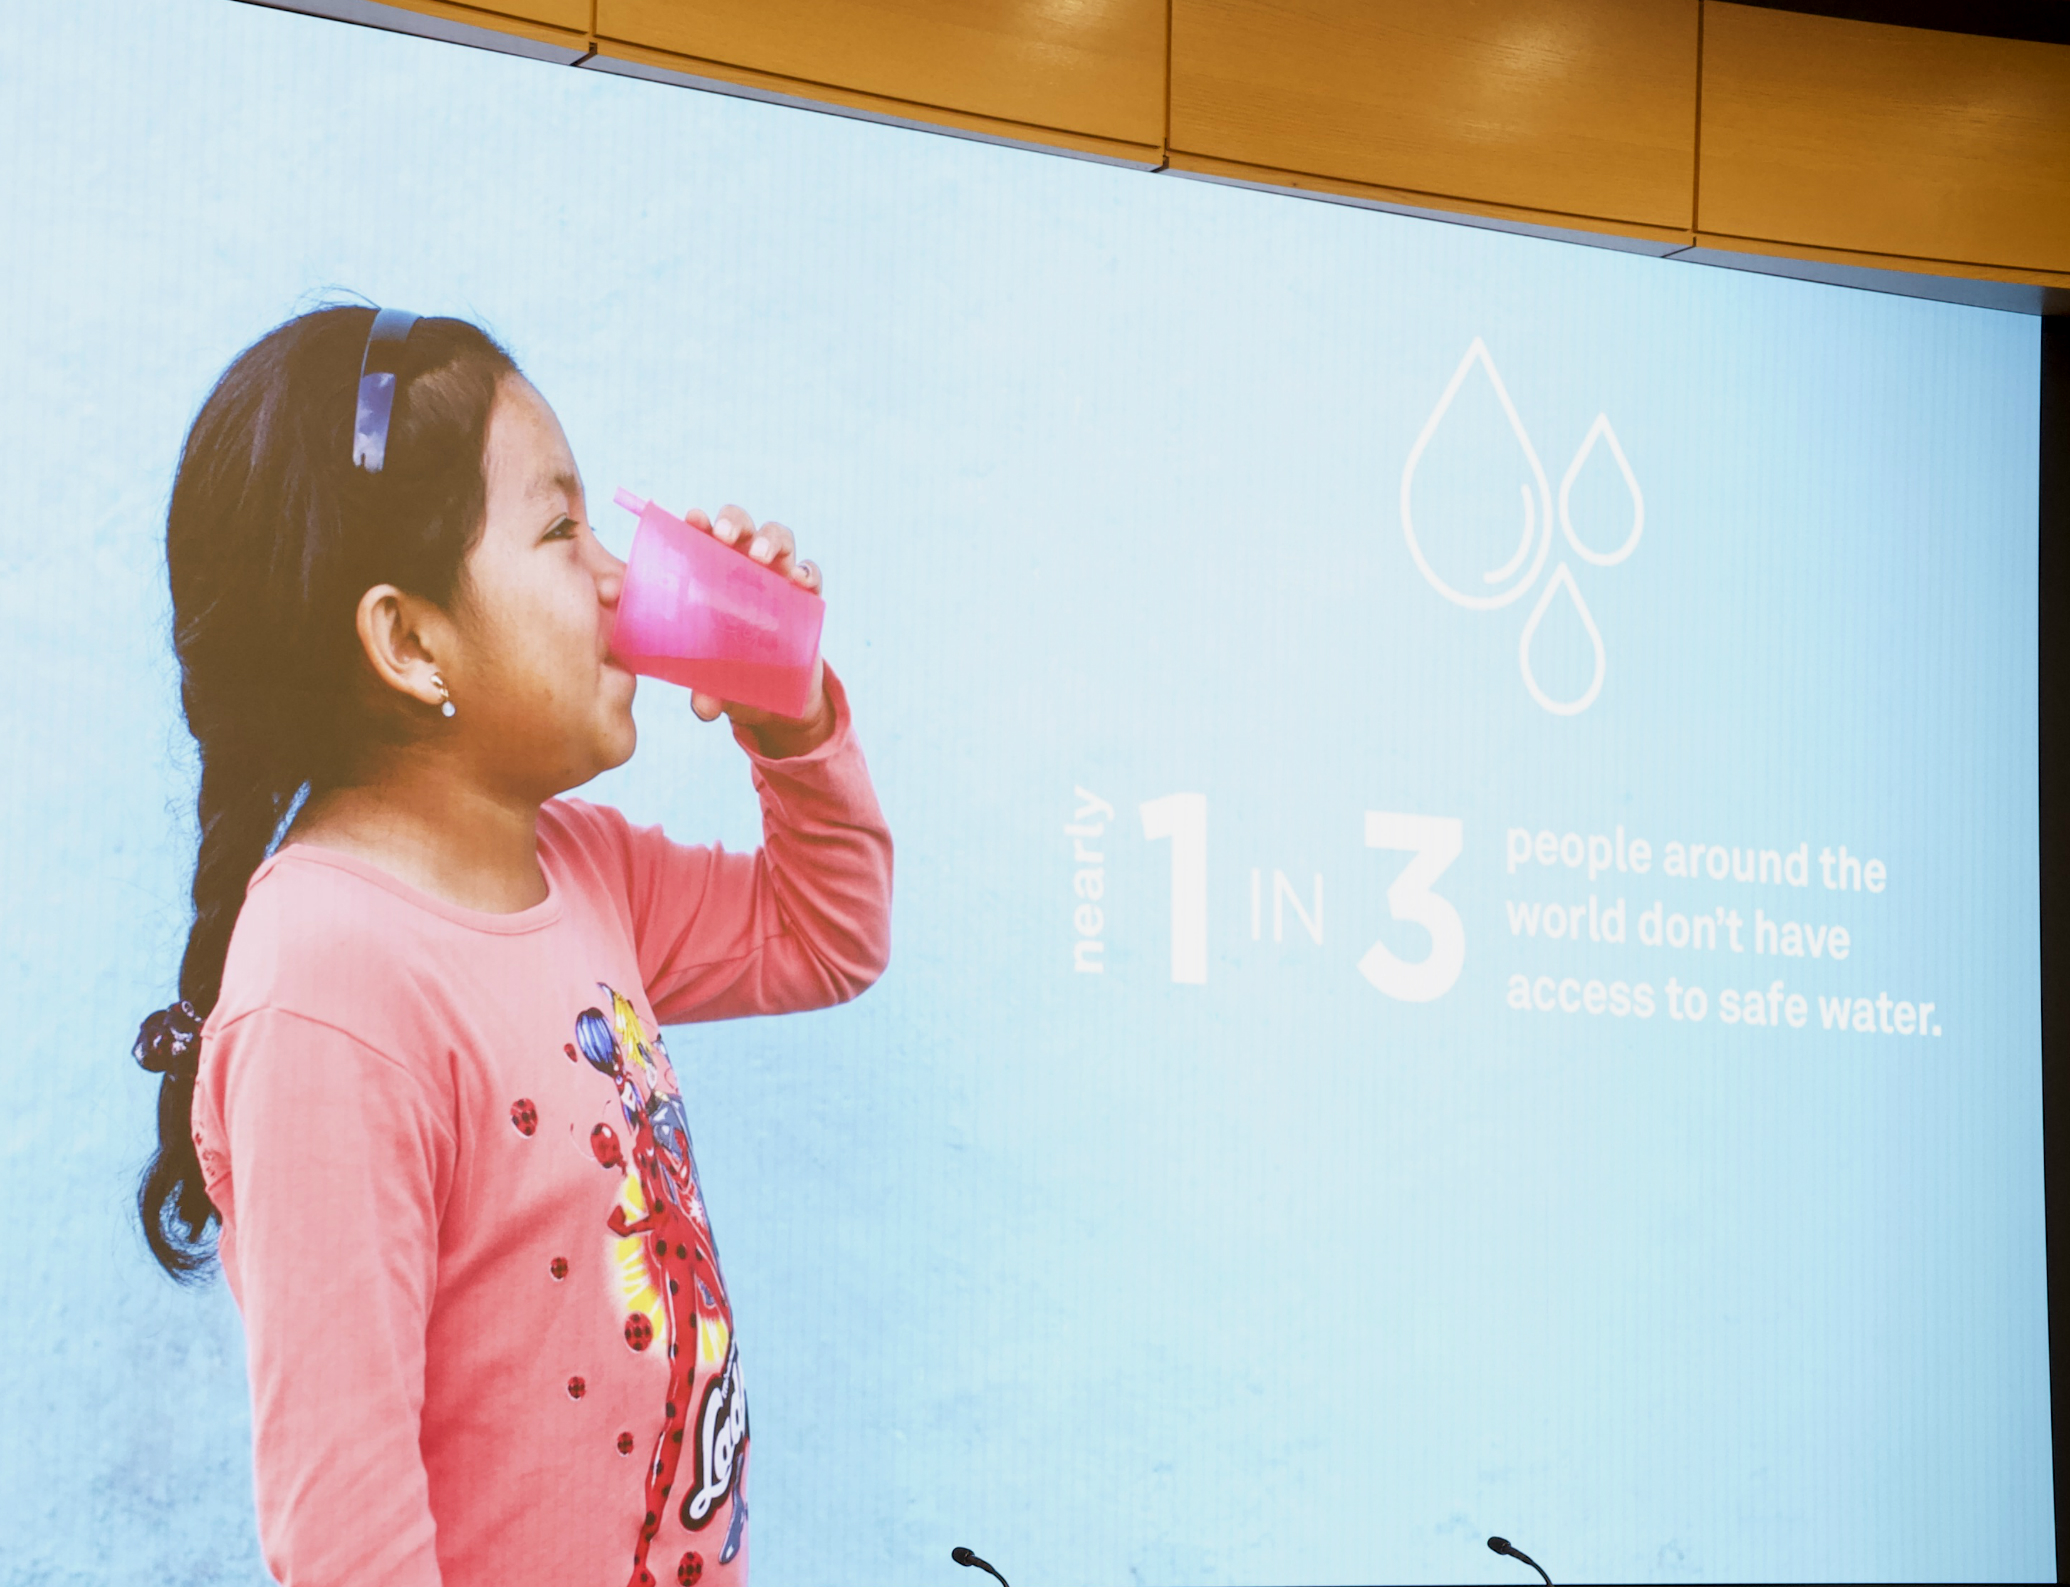 A projected image of a girl drinking water from a pink cup, alongside the words "nearly 1 in 3 people around the world don't have access to safe water"